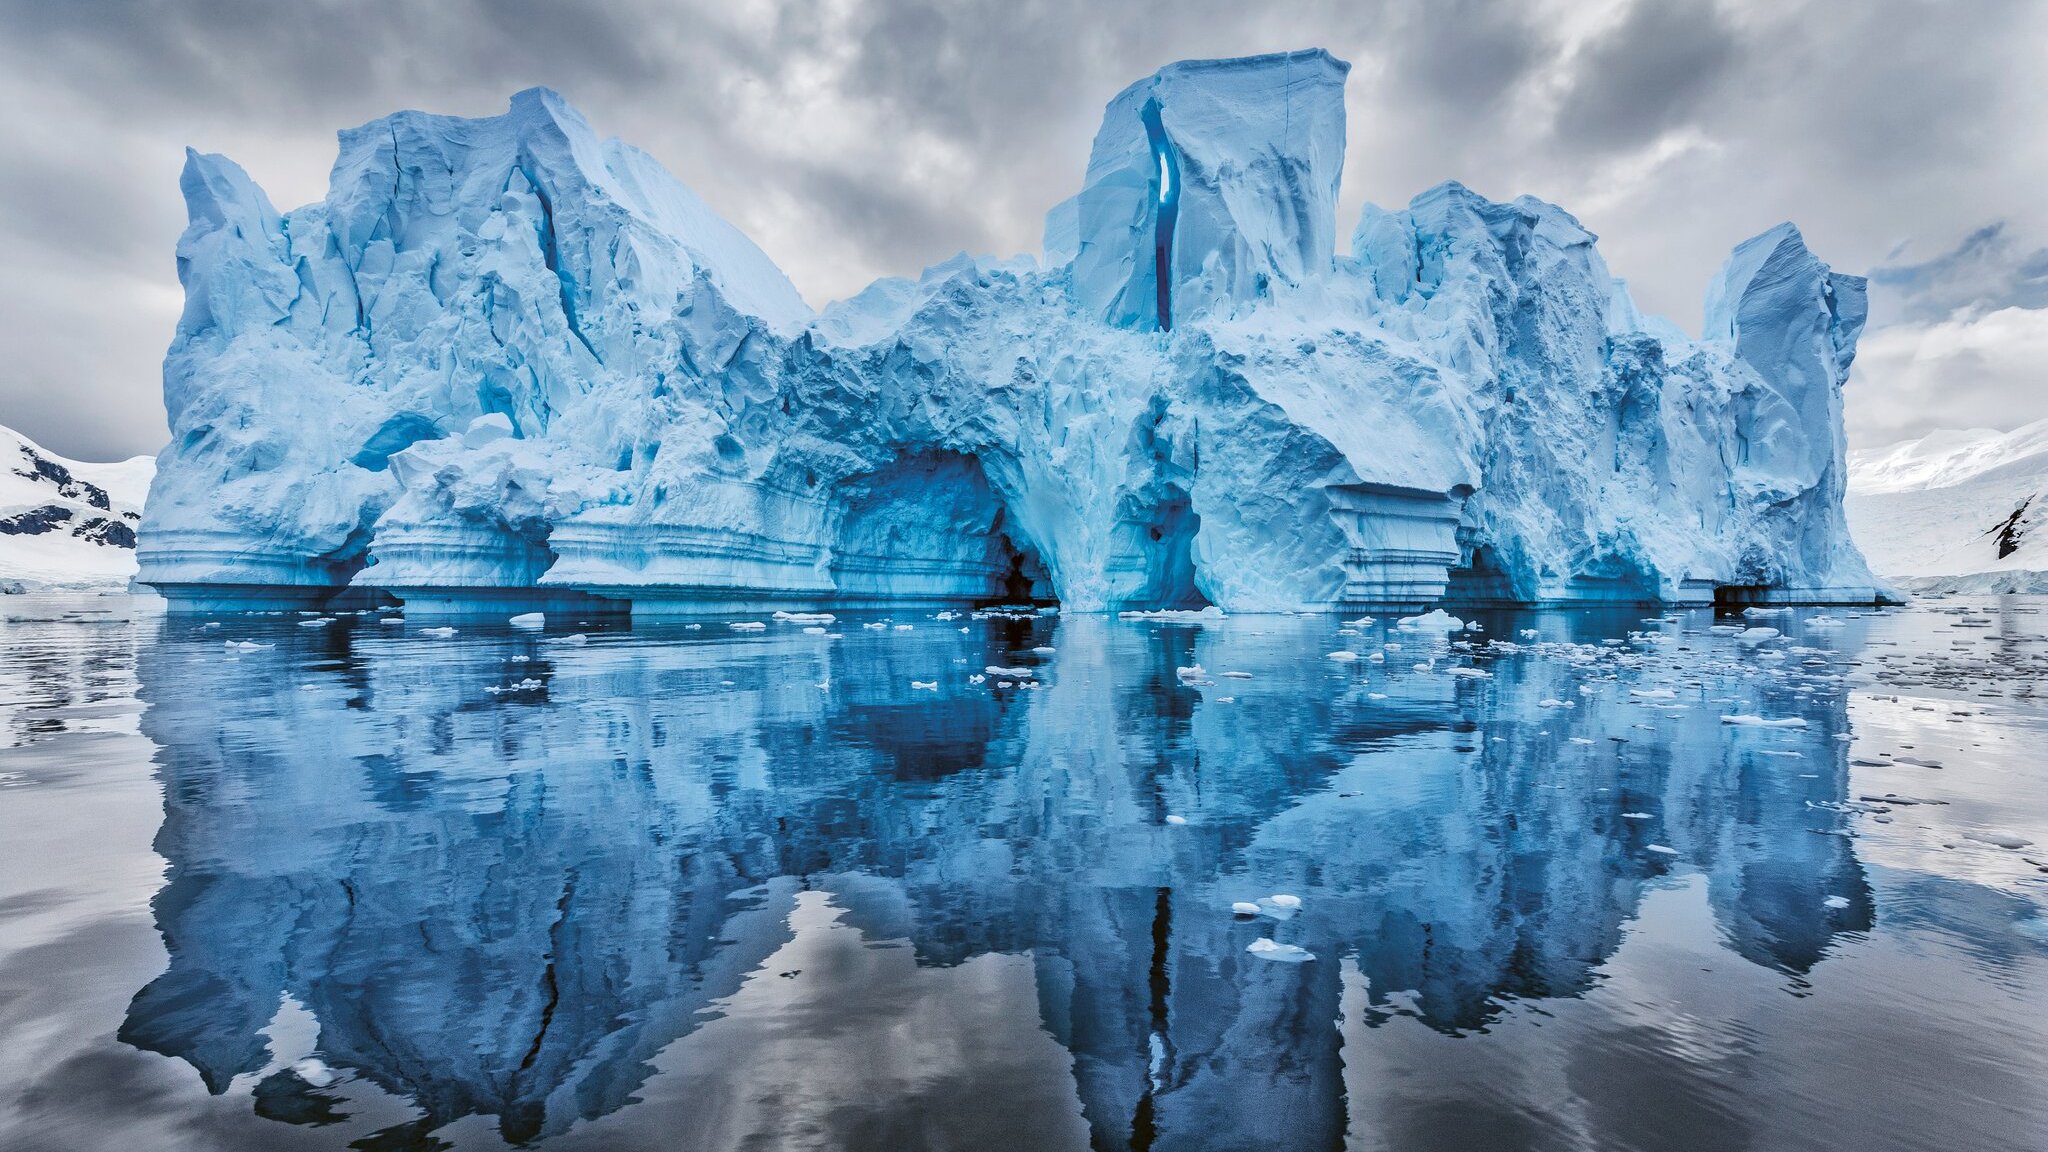 The conservation photographer Paul Nicklen is committed to protecting the polar regions